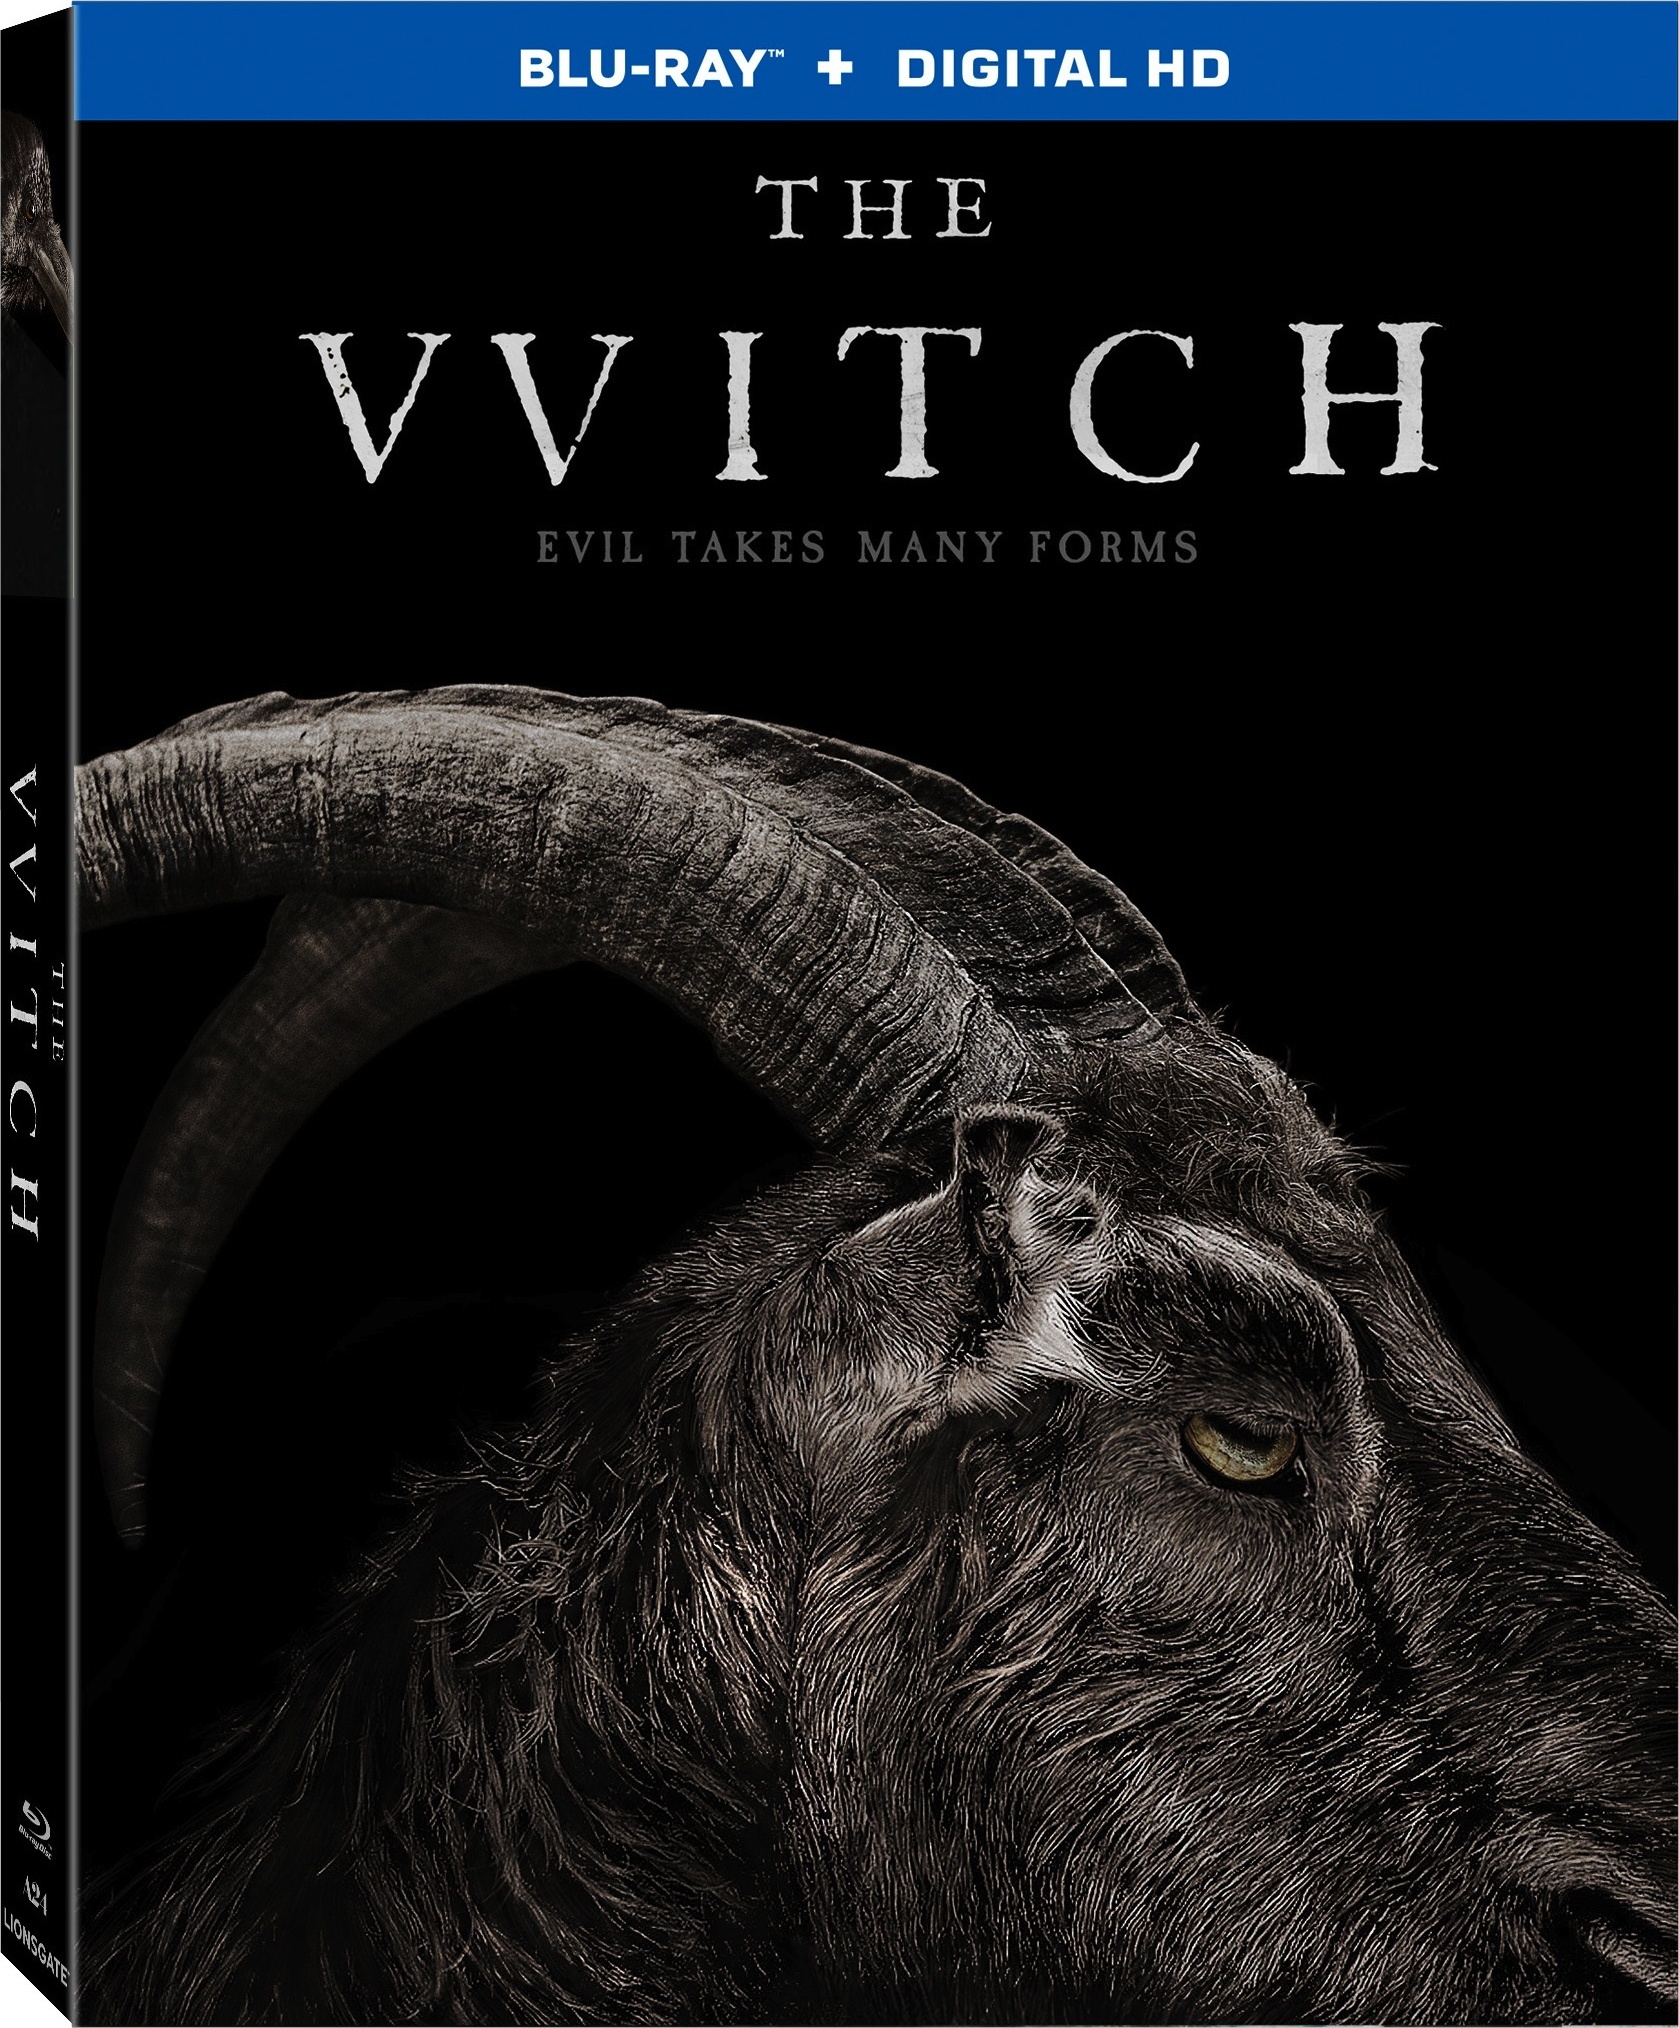 The Witch (2015) The VVitch: A New-England Folktale  (2015) La Bruja (2015) [DTS 5.1 + SUP] [Blu Ray-Rip] 149279_front